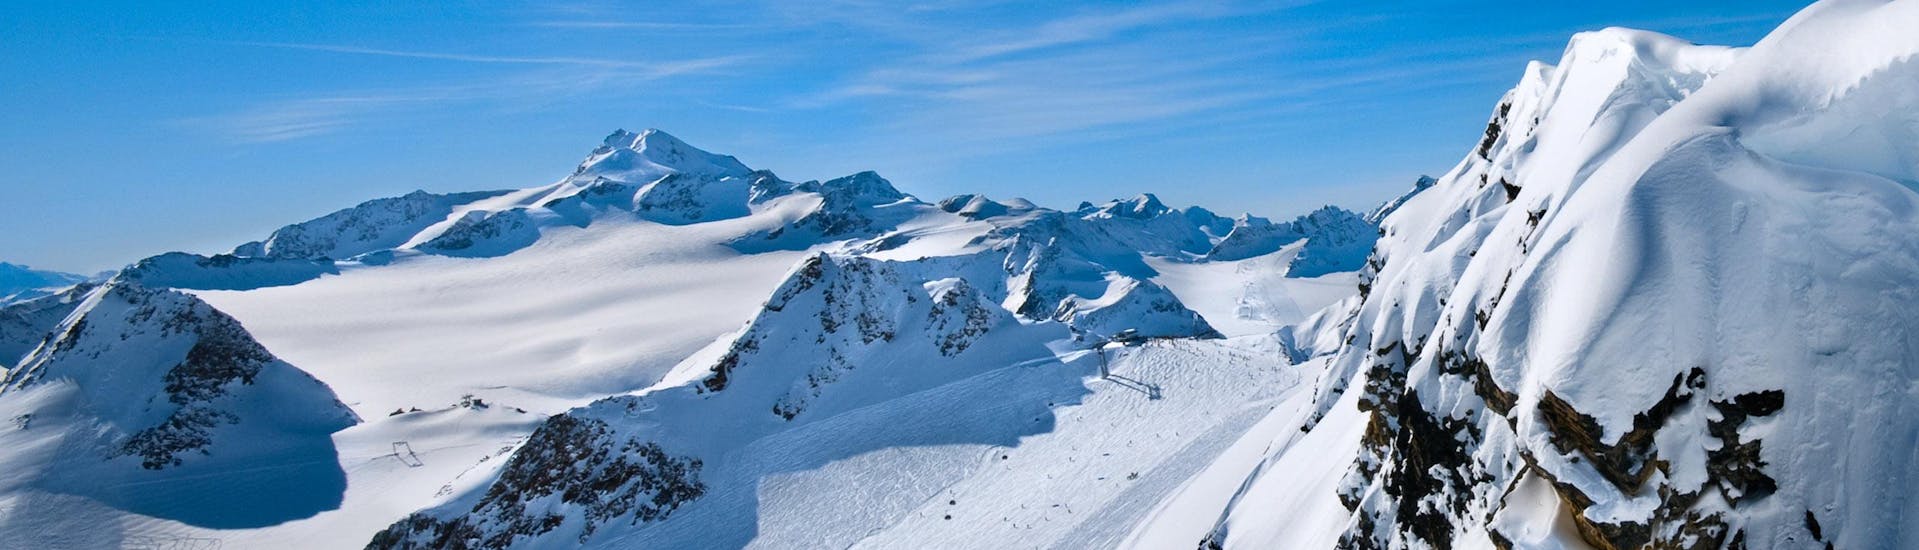 A view of a snowy mountain top in the ski resort of Plagne Aime 2000, where ski schools gather to start their ski lessons.